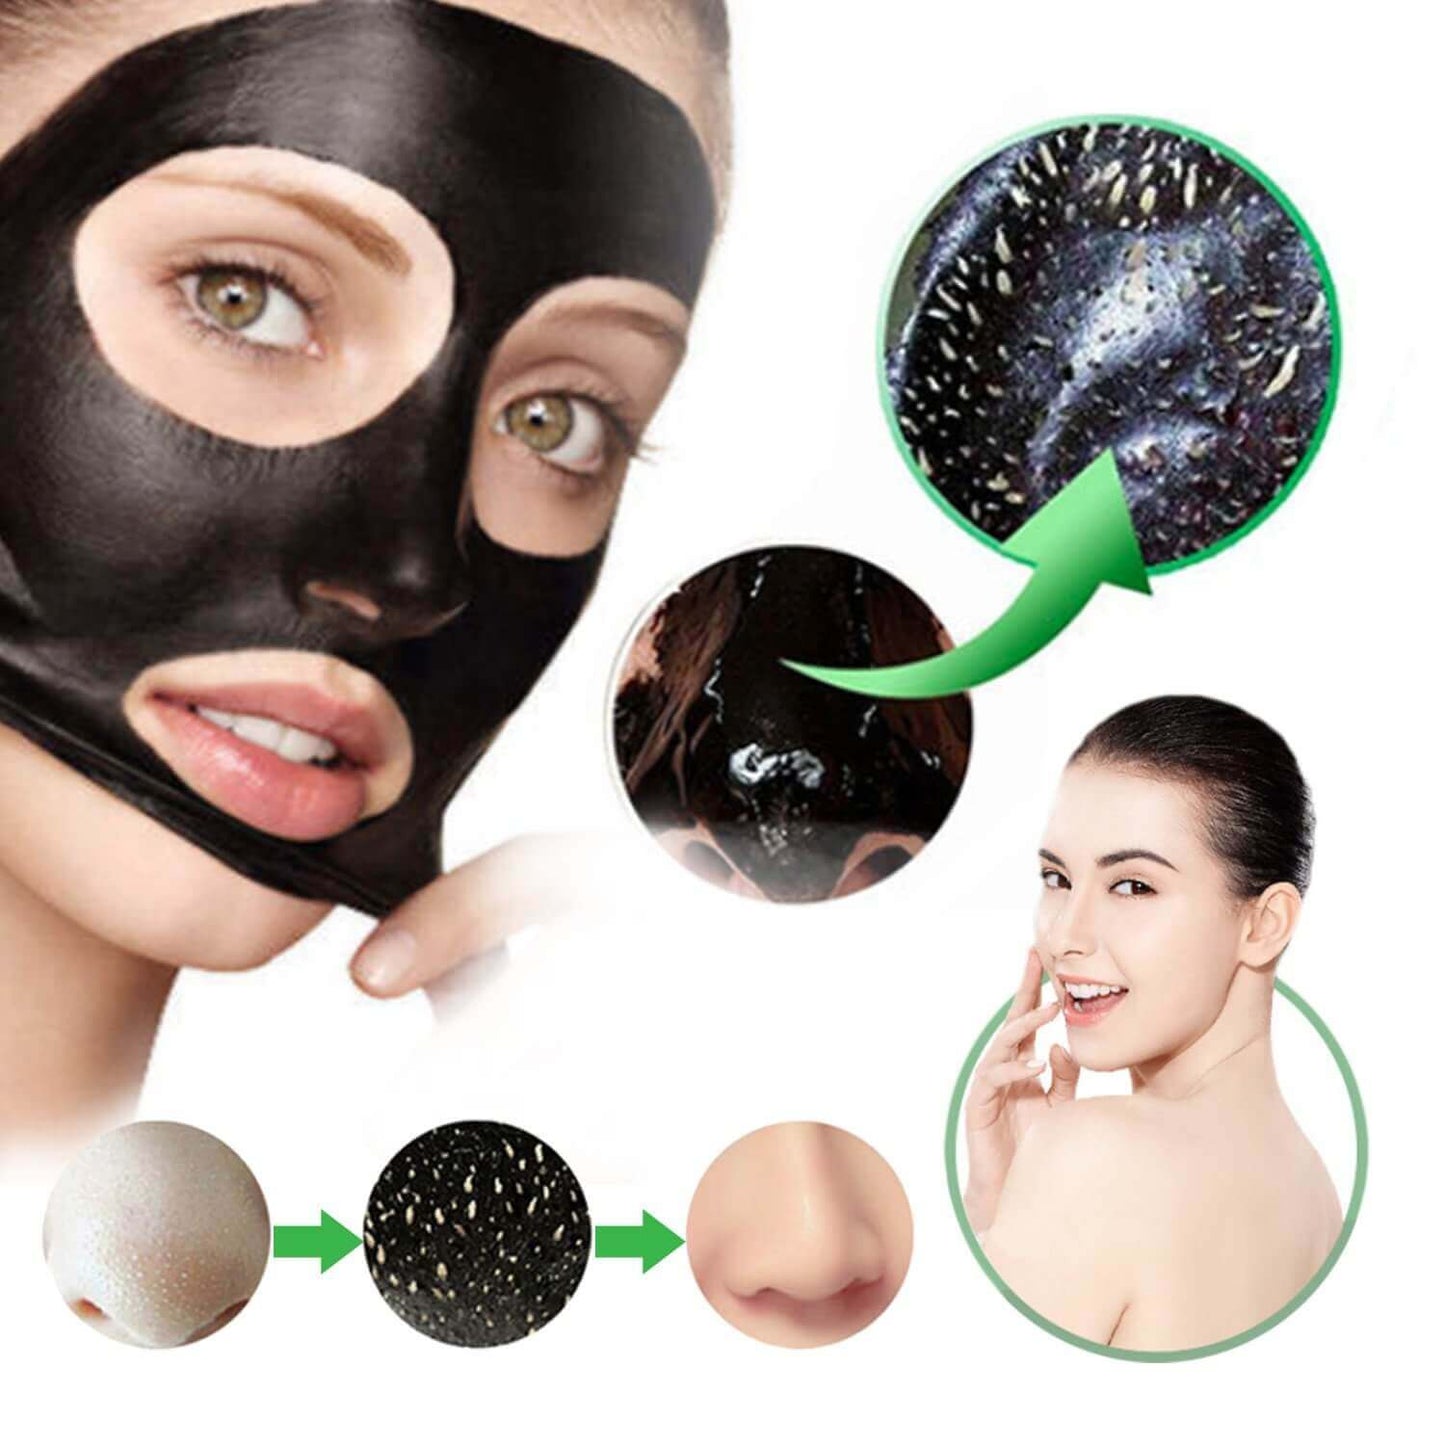 Black Mask Blackhead Remover Purifying Black Peel Off Mask - Activated Charcoal hollywoodsecrets